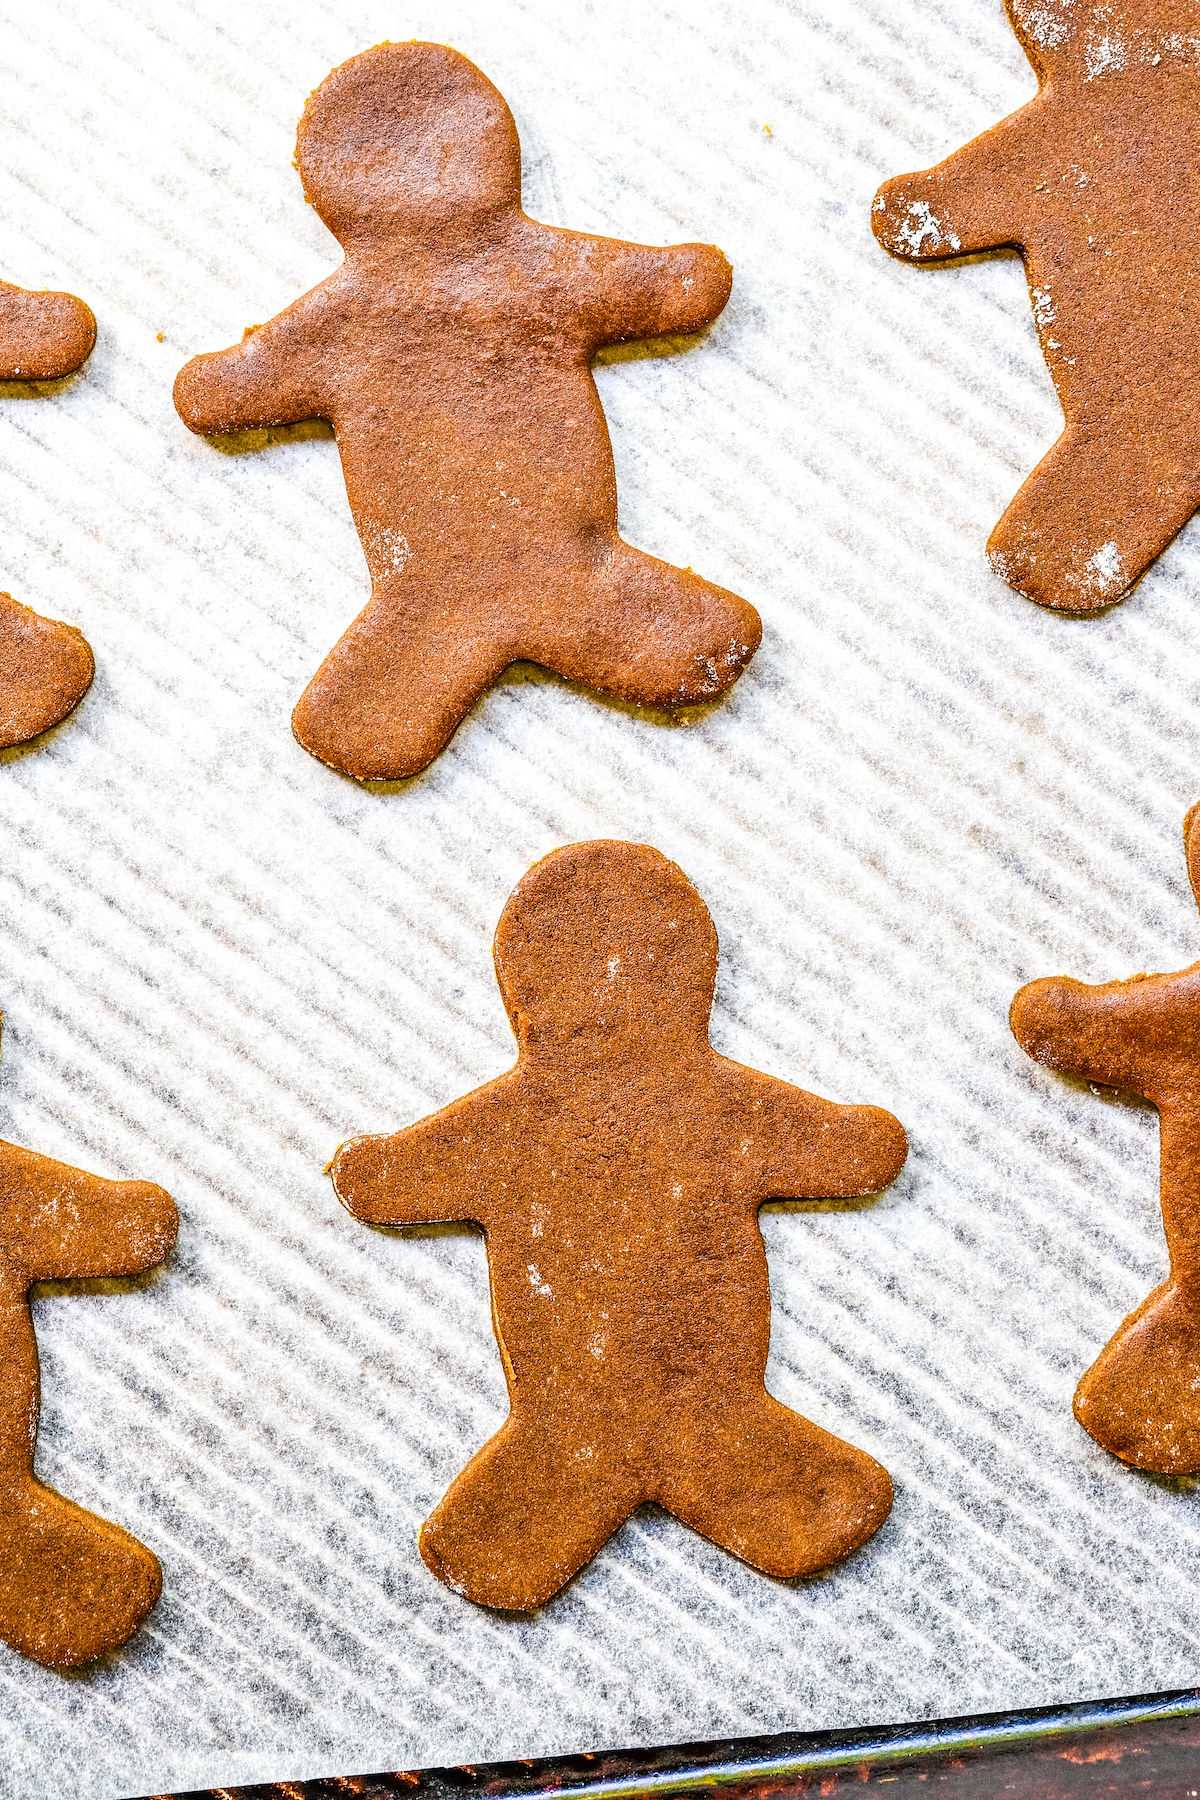 Unbaked gingerbread man cookies on a baking sheet.